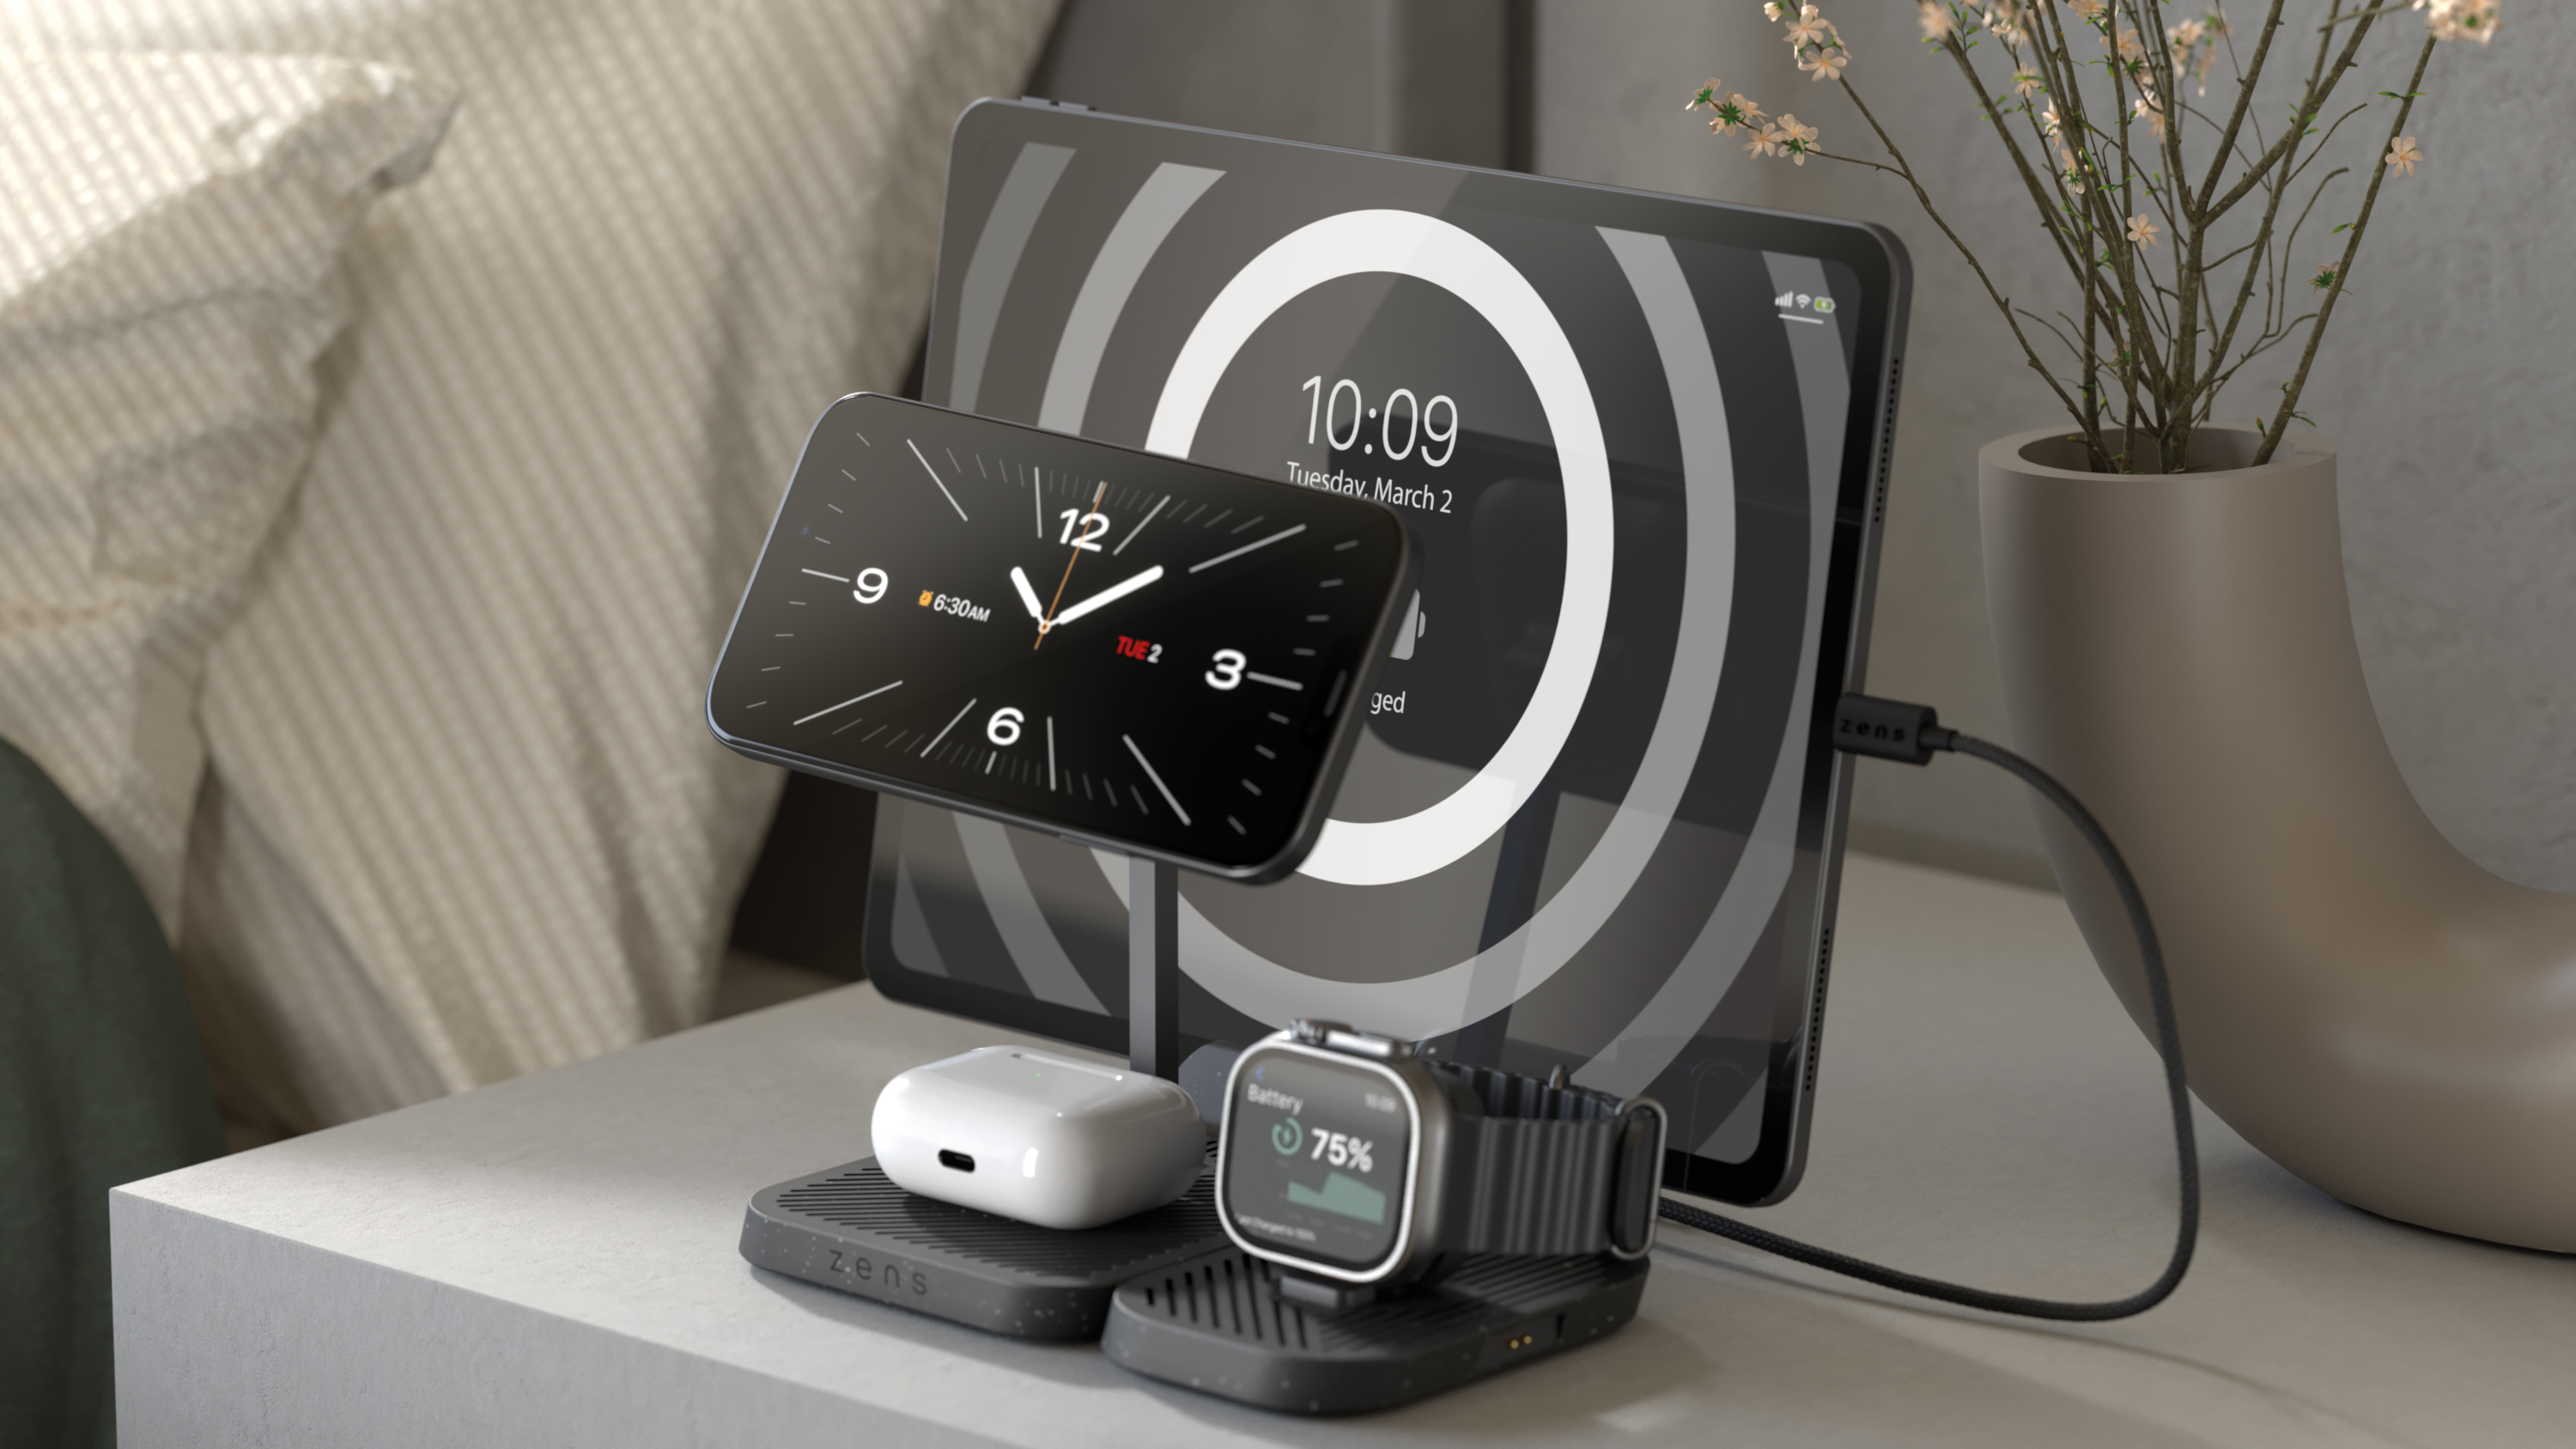 4-in-1 Modular Wireless Charger with iPad